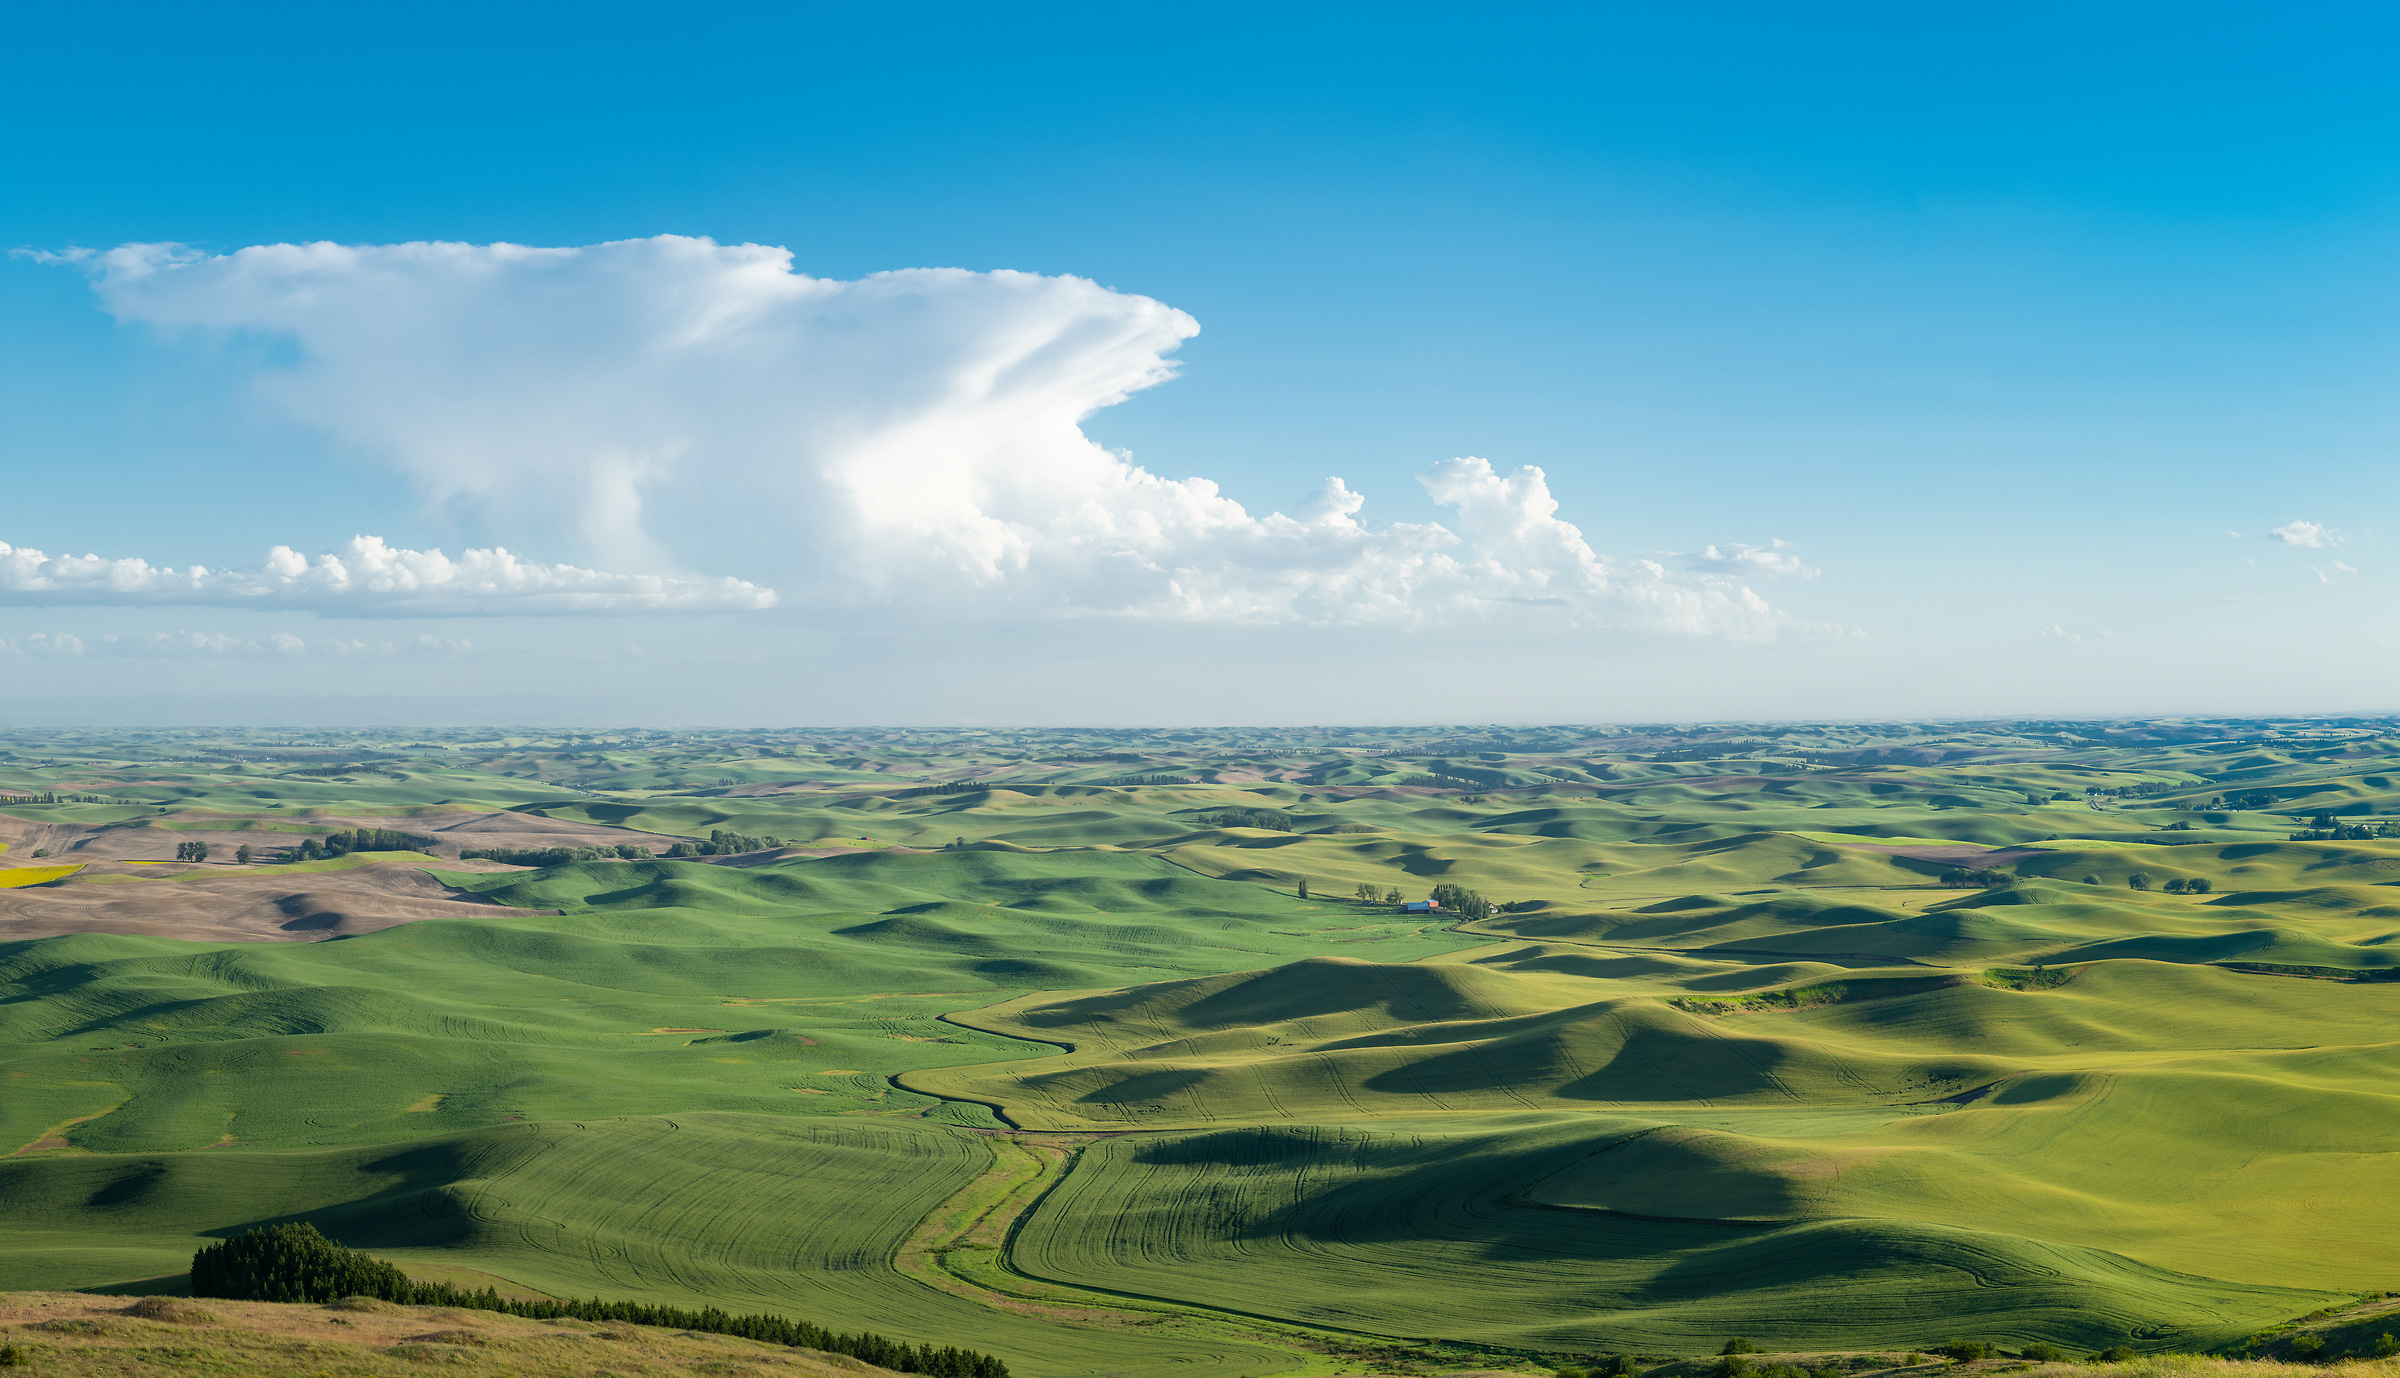 355 megapixels! A very high resolution, large-format VAST photo print farms; landscape photograph created by Greg Probst in Steptoe Butte State Park, Washington.